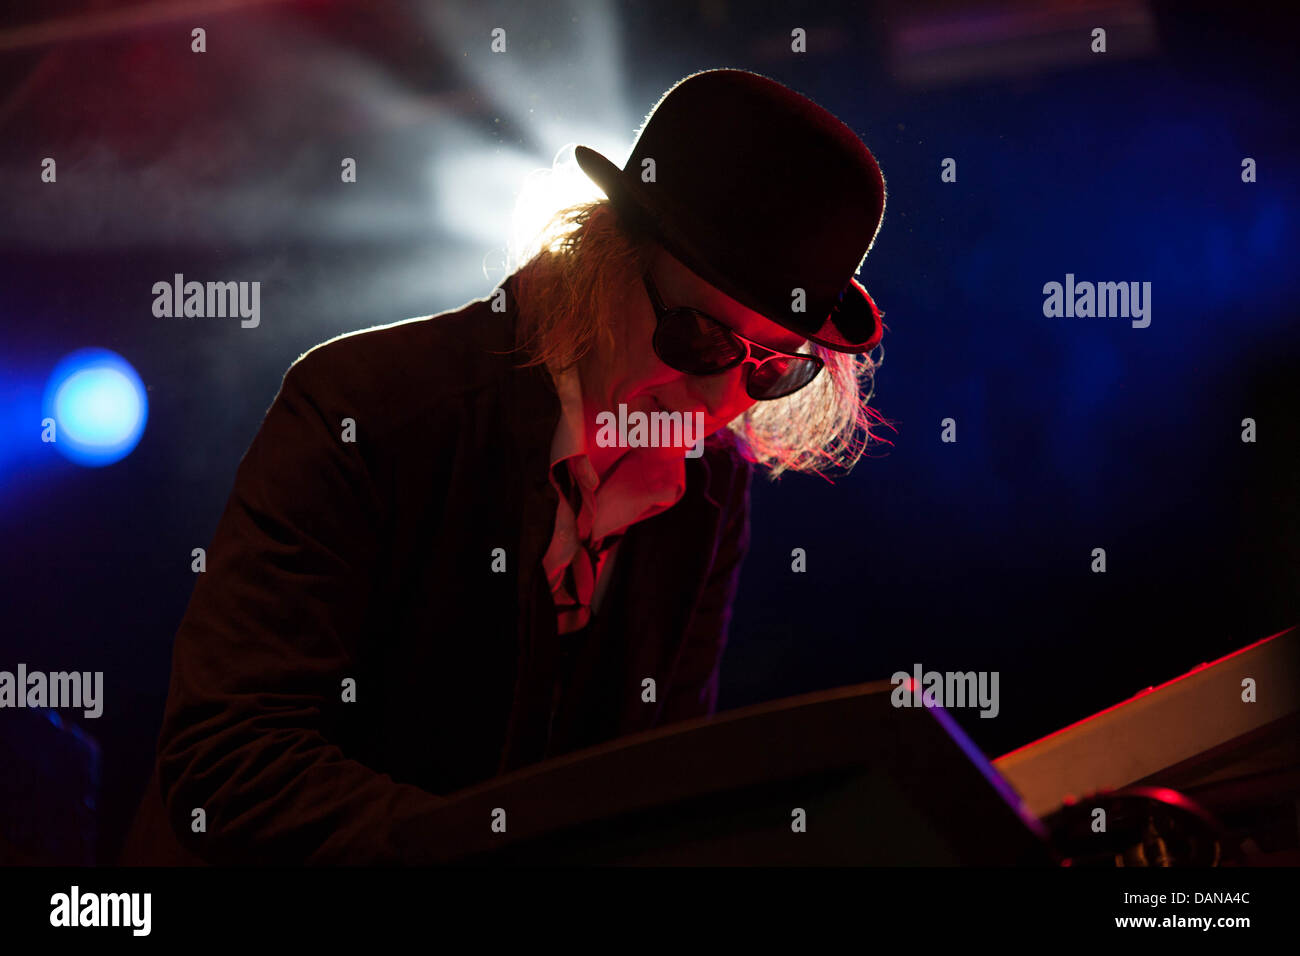 Alabama 3 perform live at the Westport Music festival 29/6/13 Stock Photo